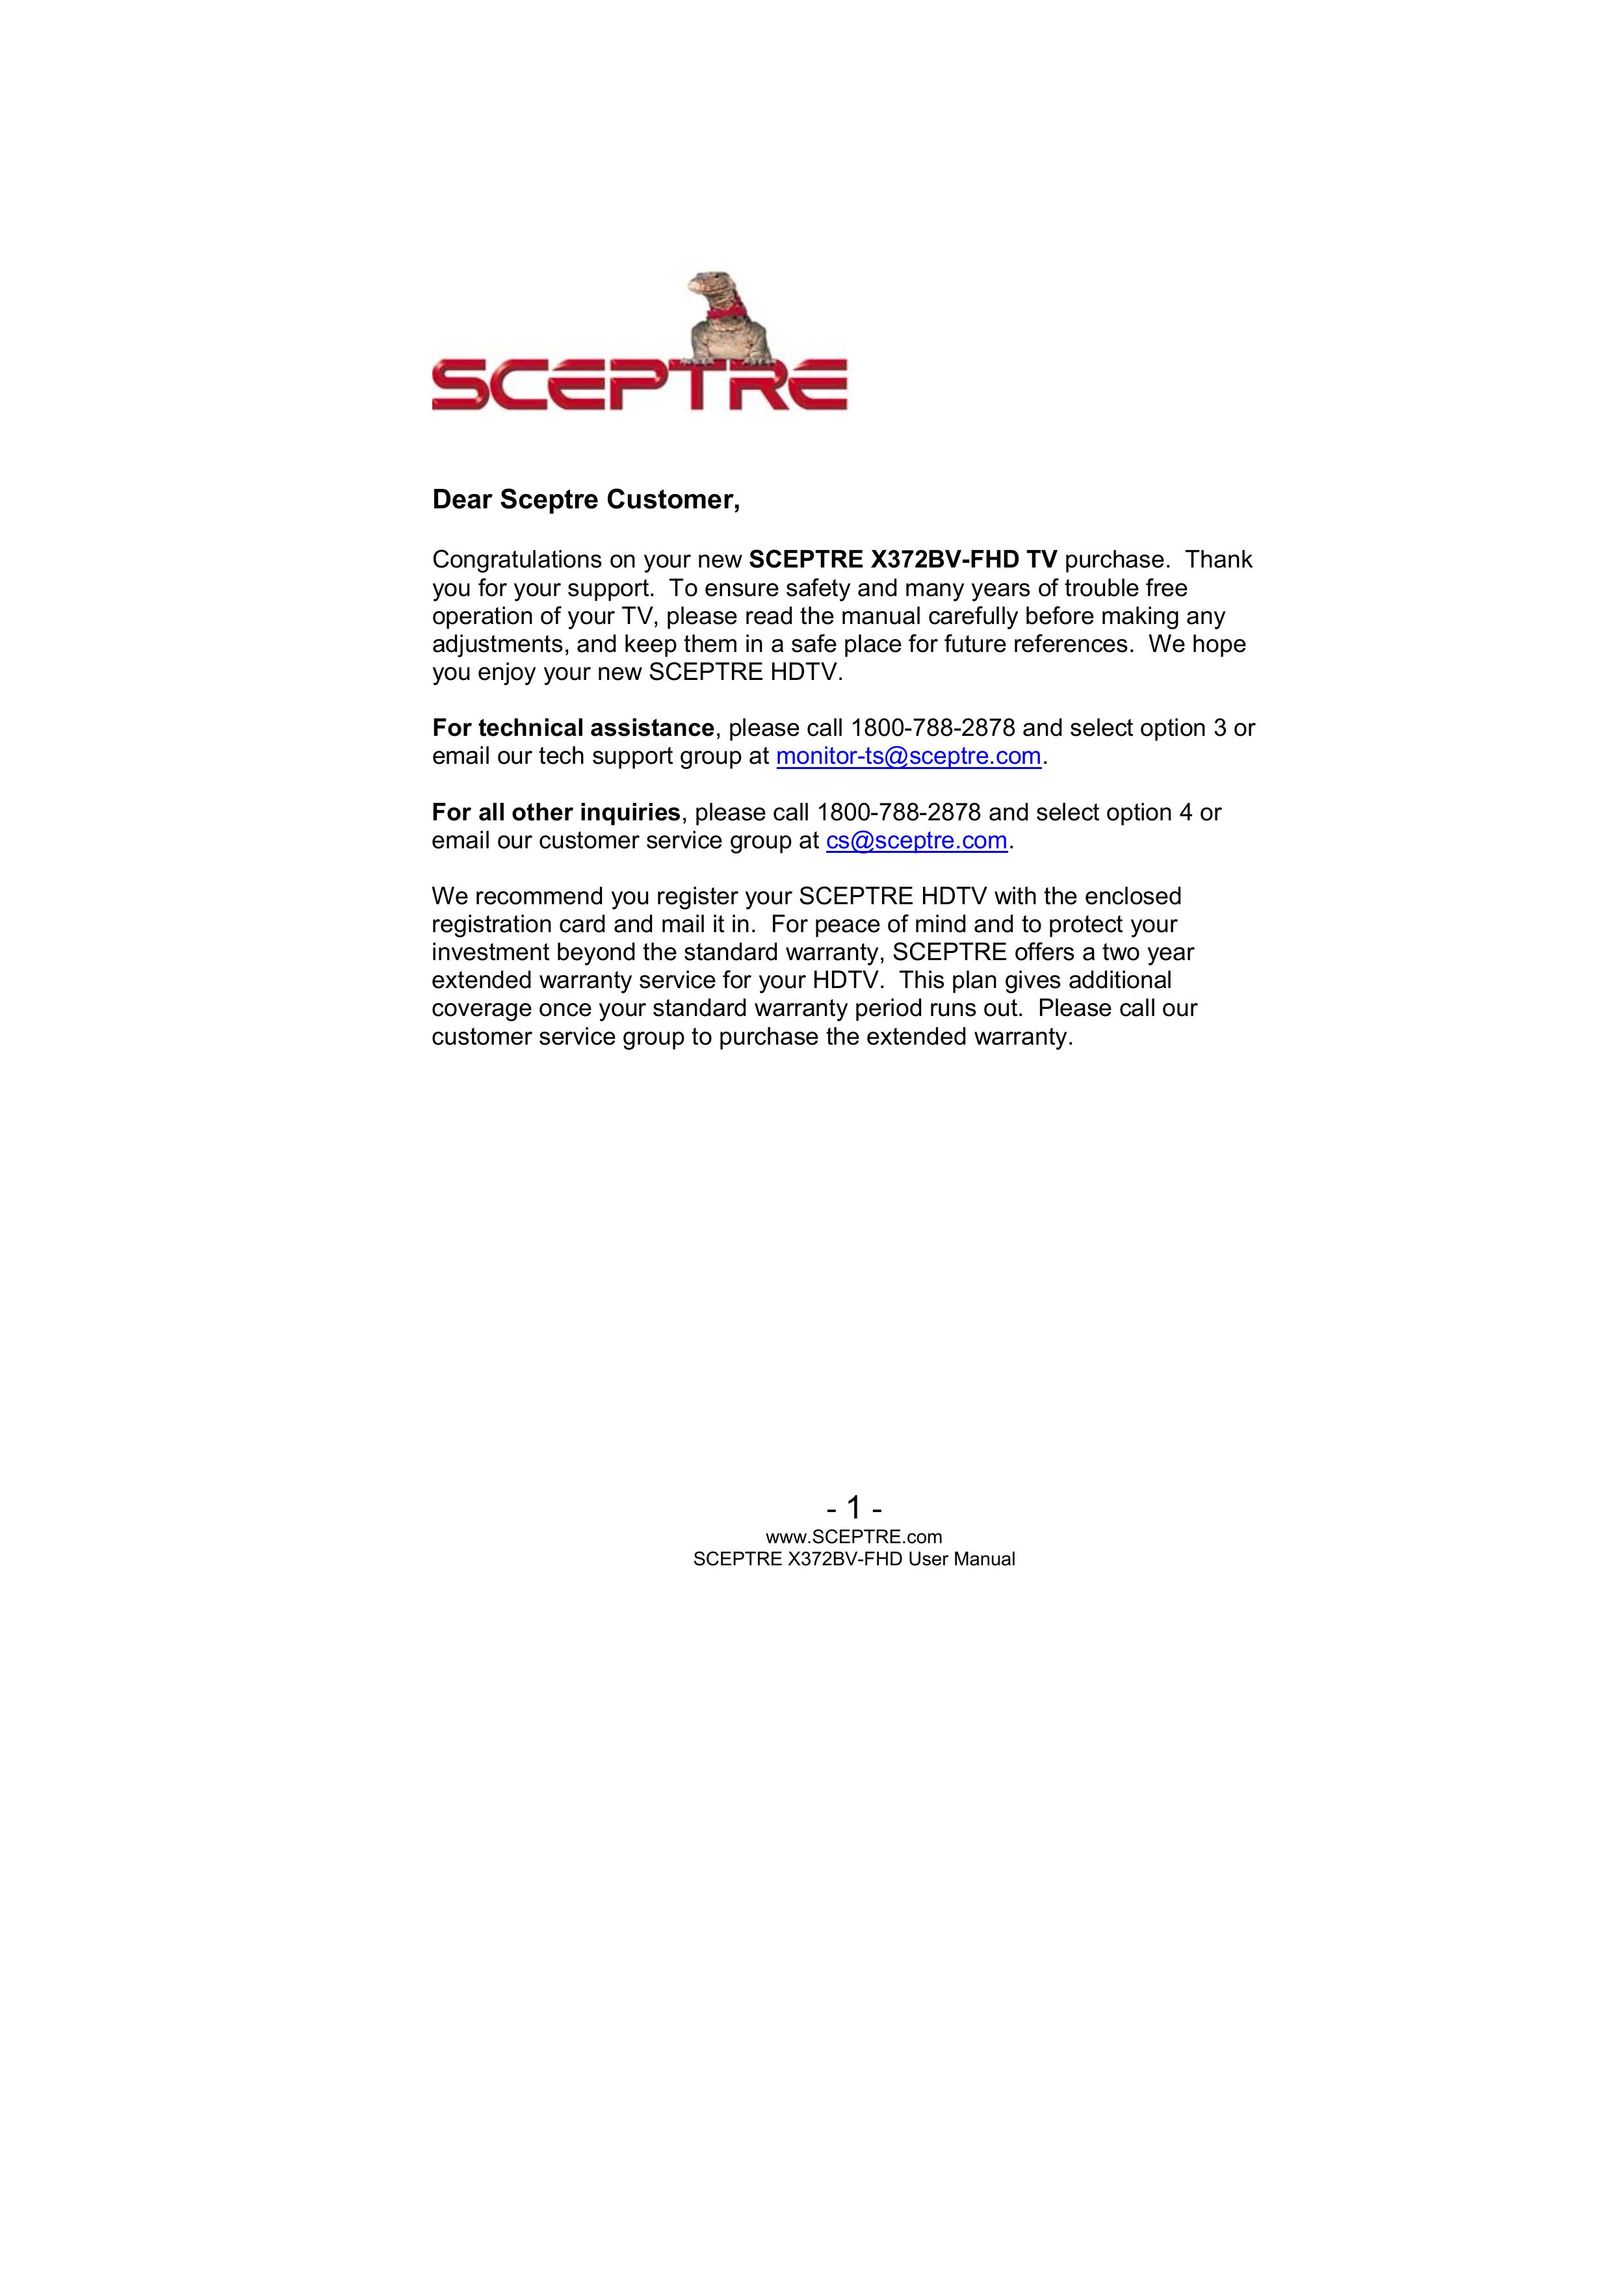 Sceptre Technologies X372BV-FHD Flat Panel Television User Manual